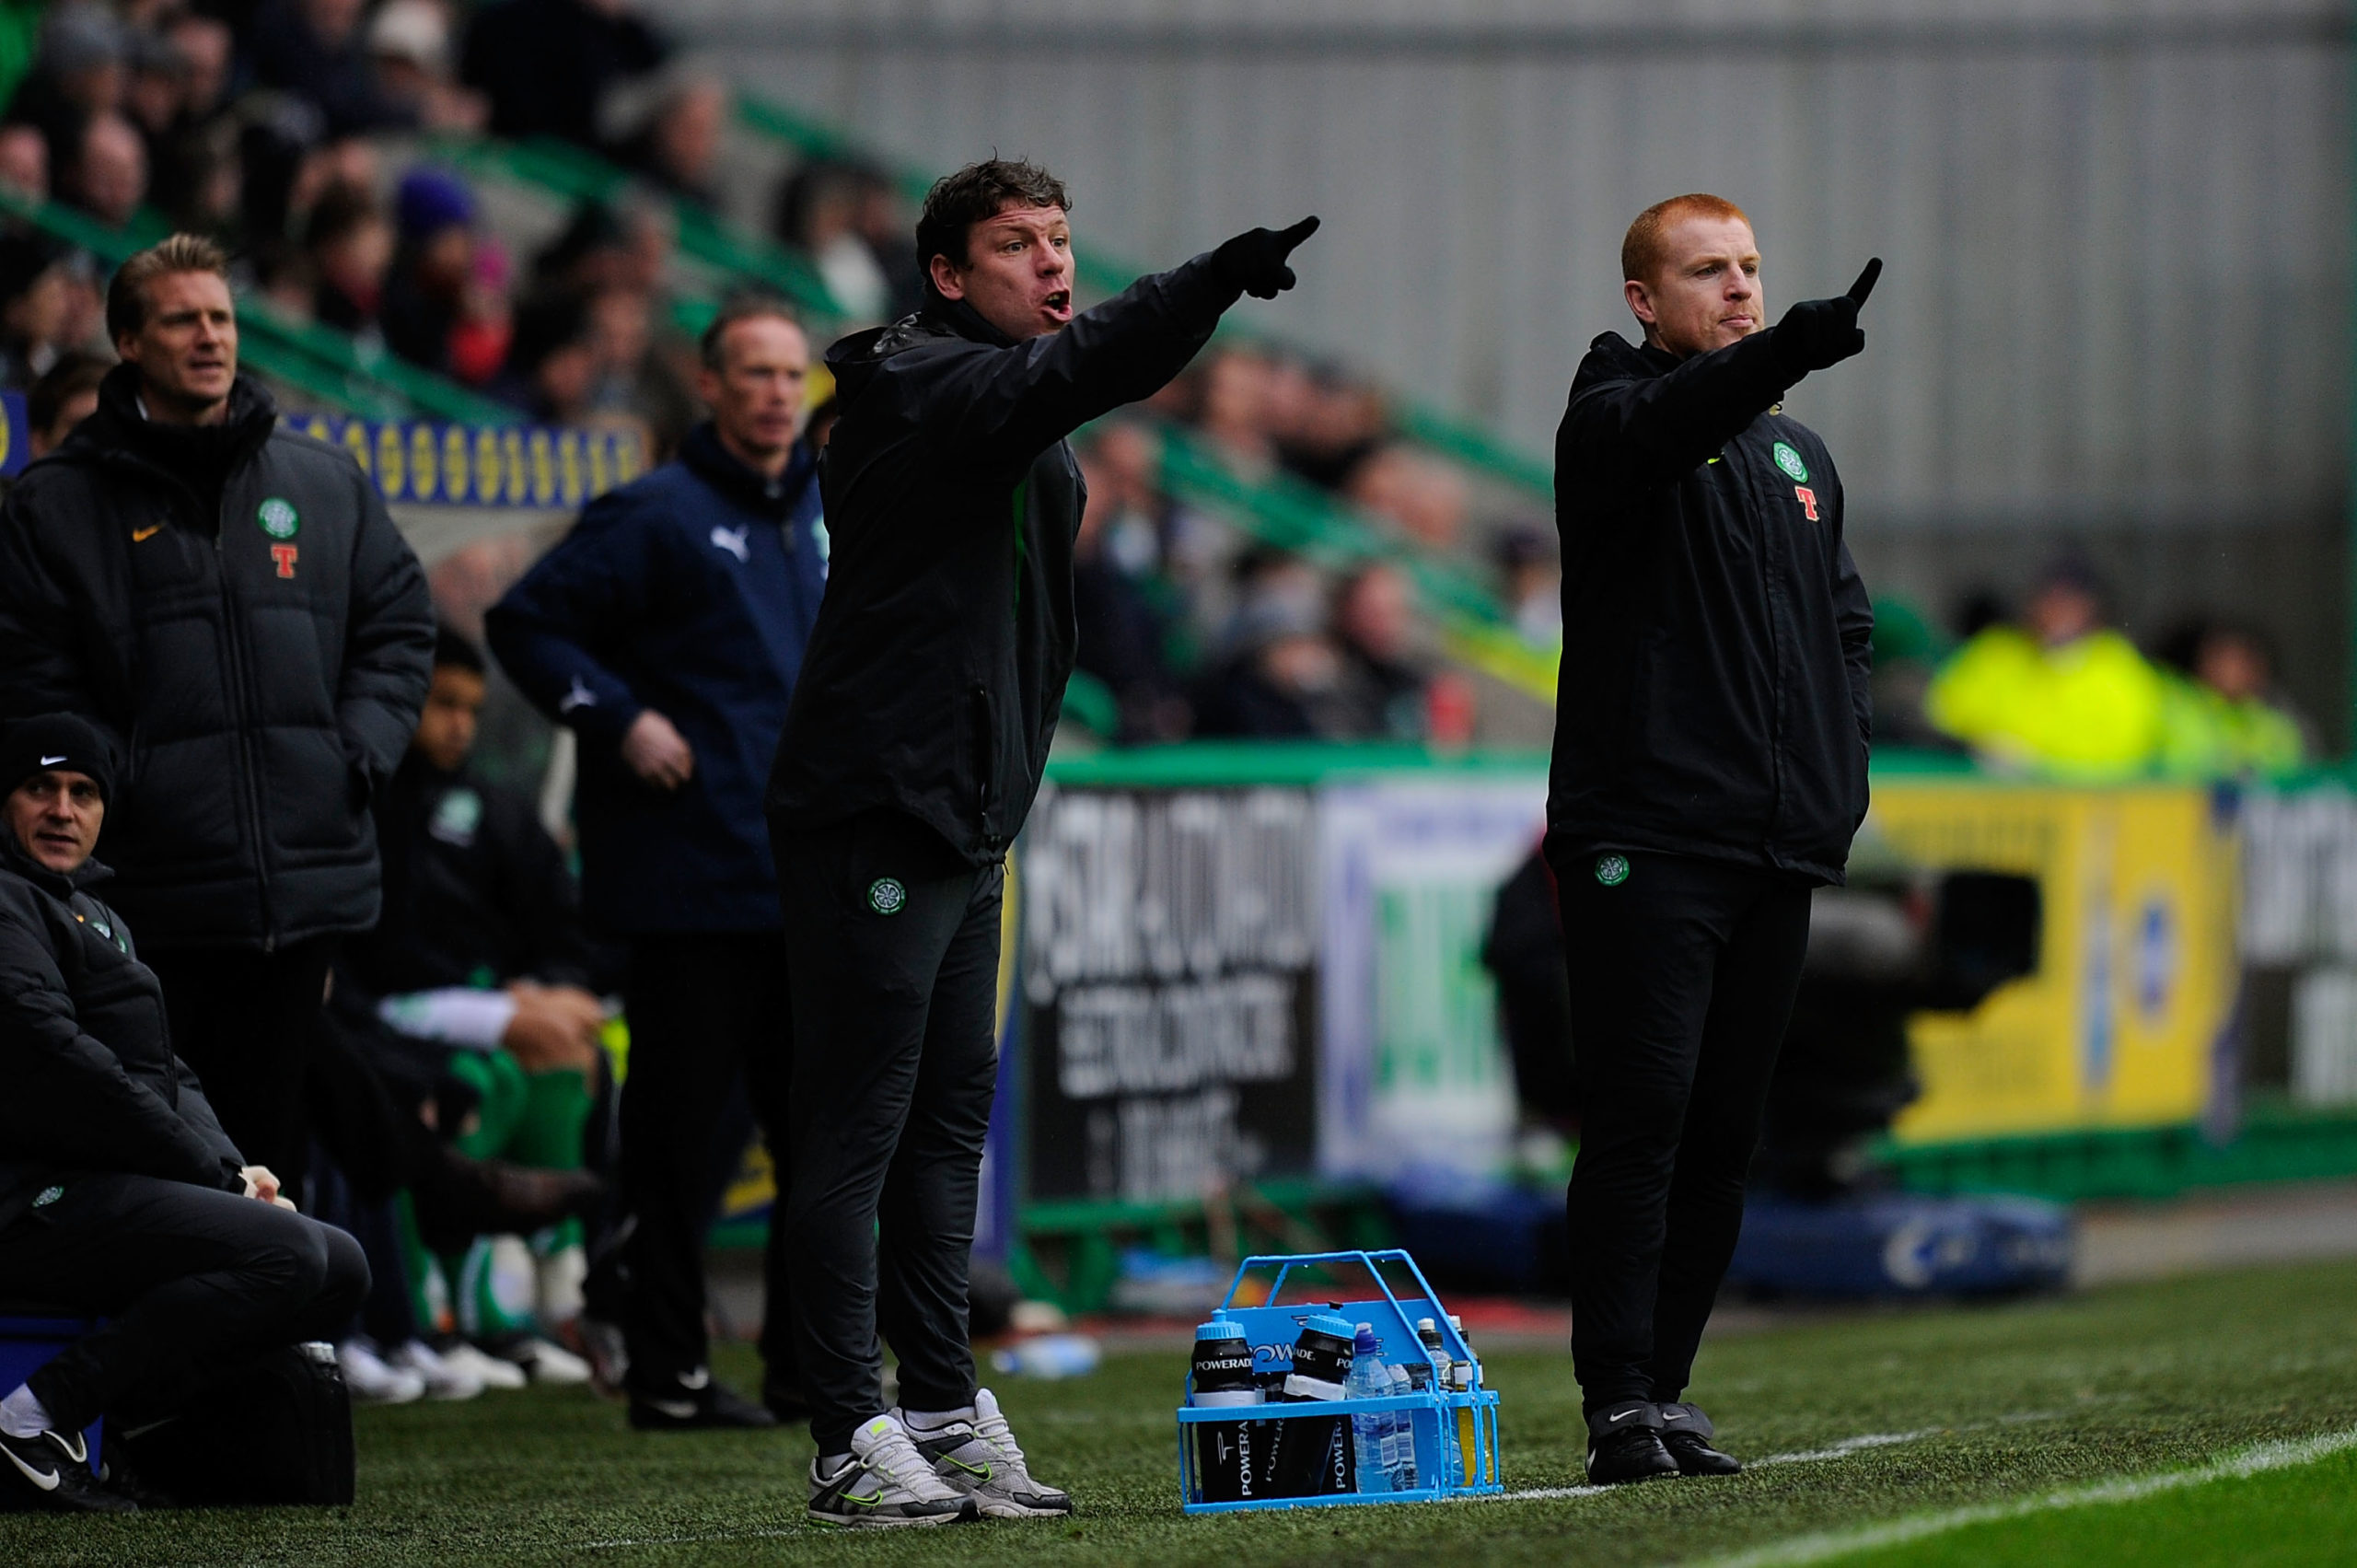 Alan Thompson says he hasn't spoken to Lennon in years; wants freshness at Celtic